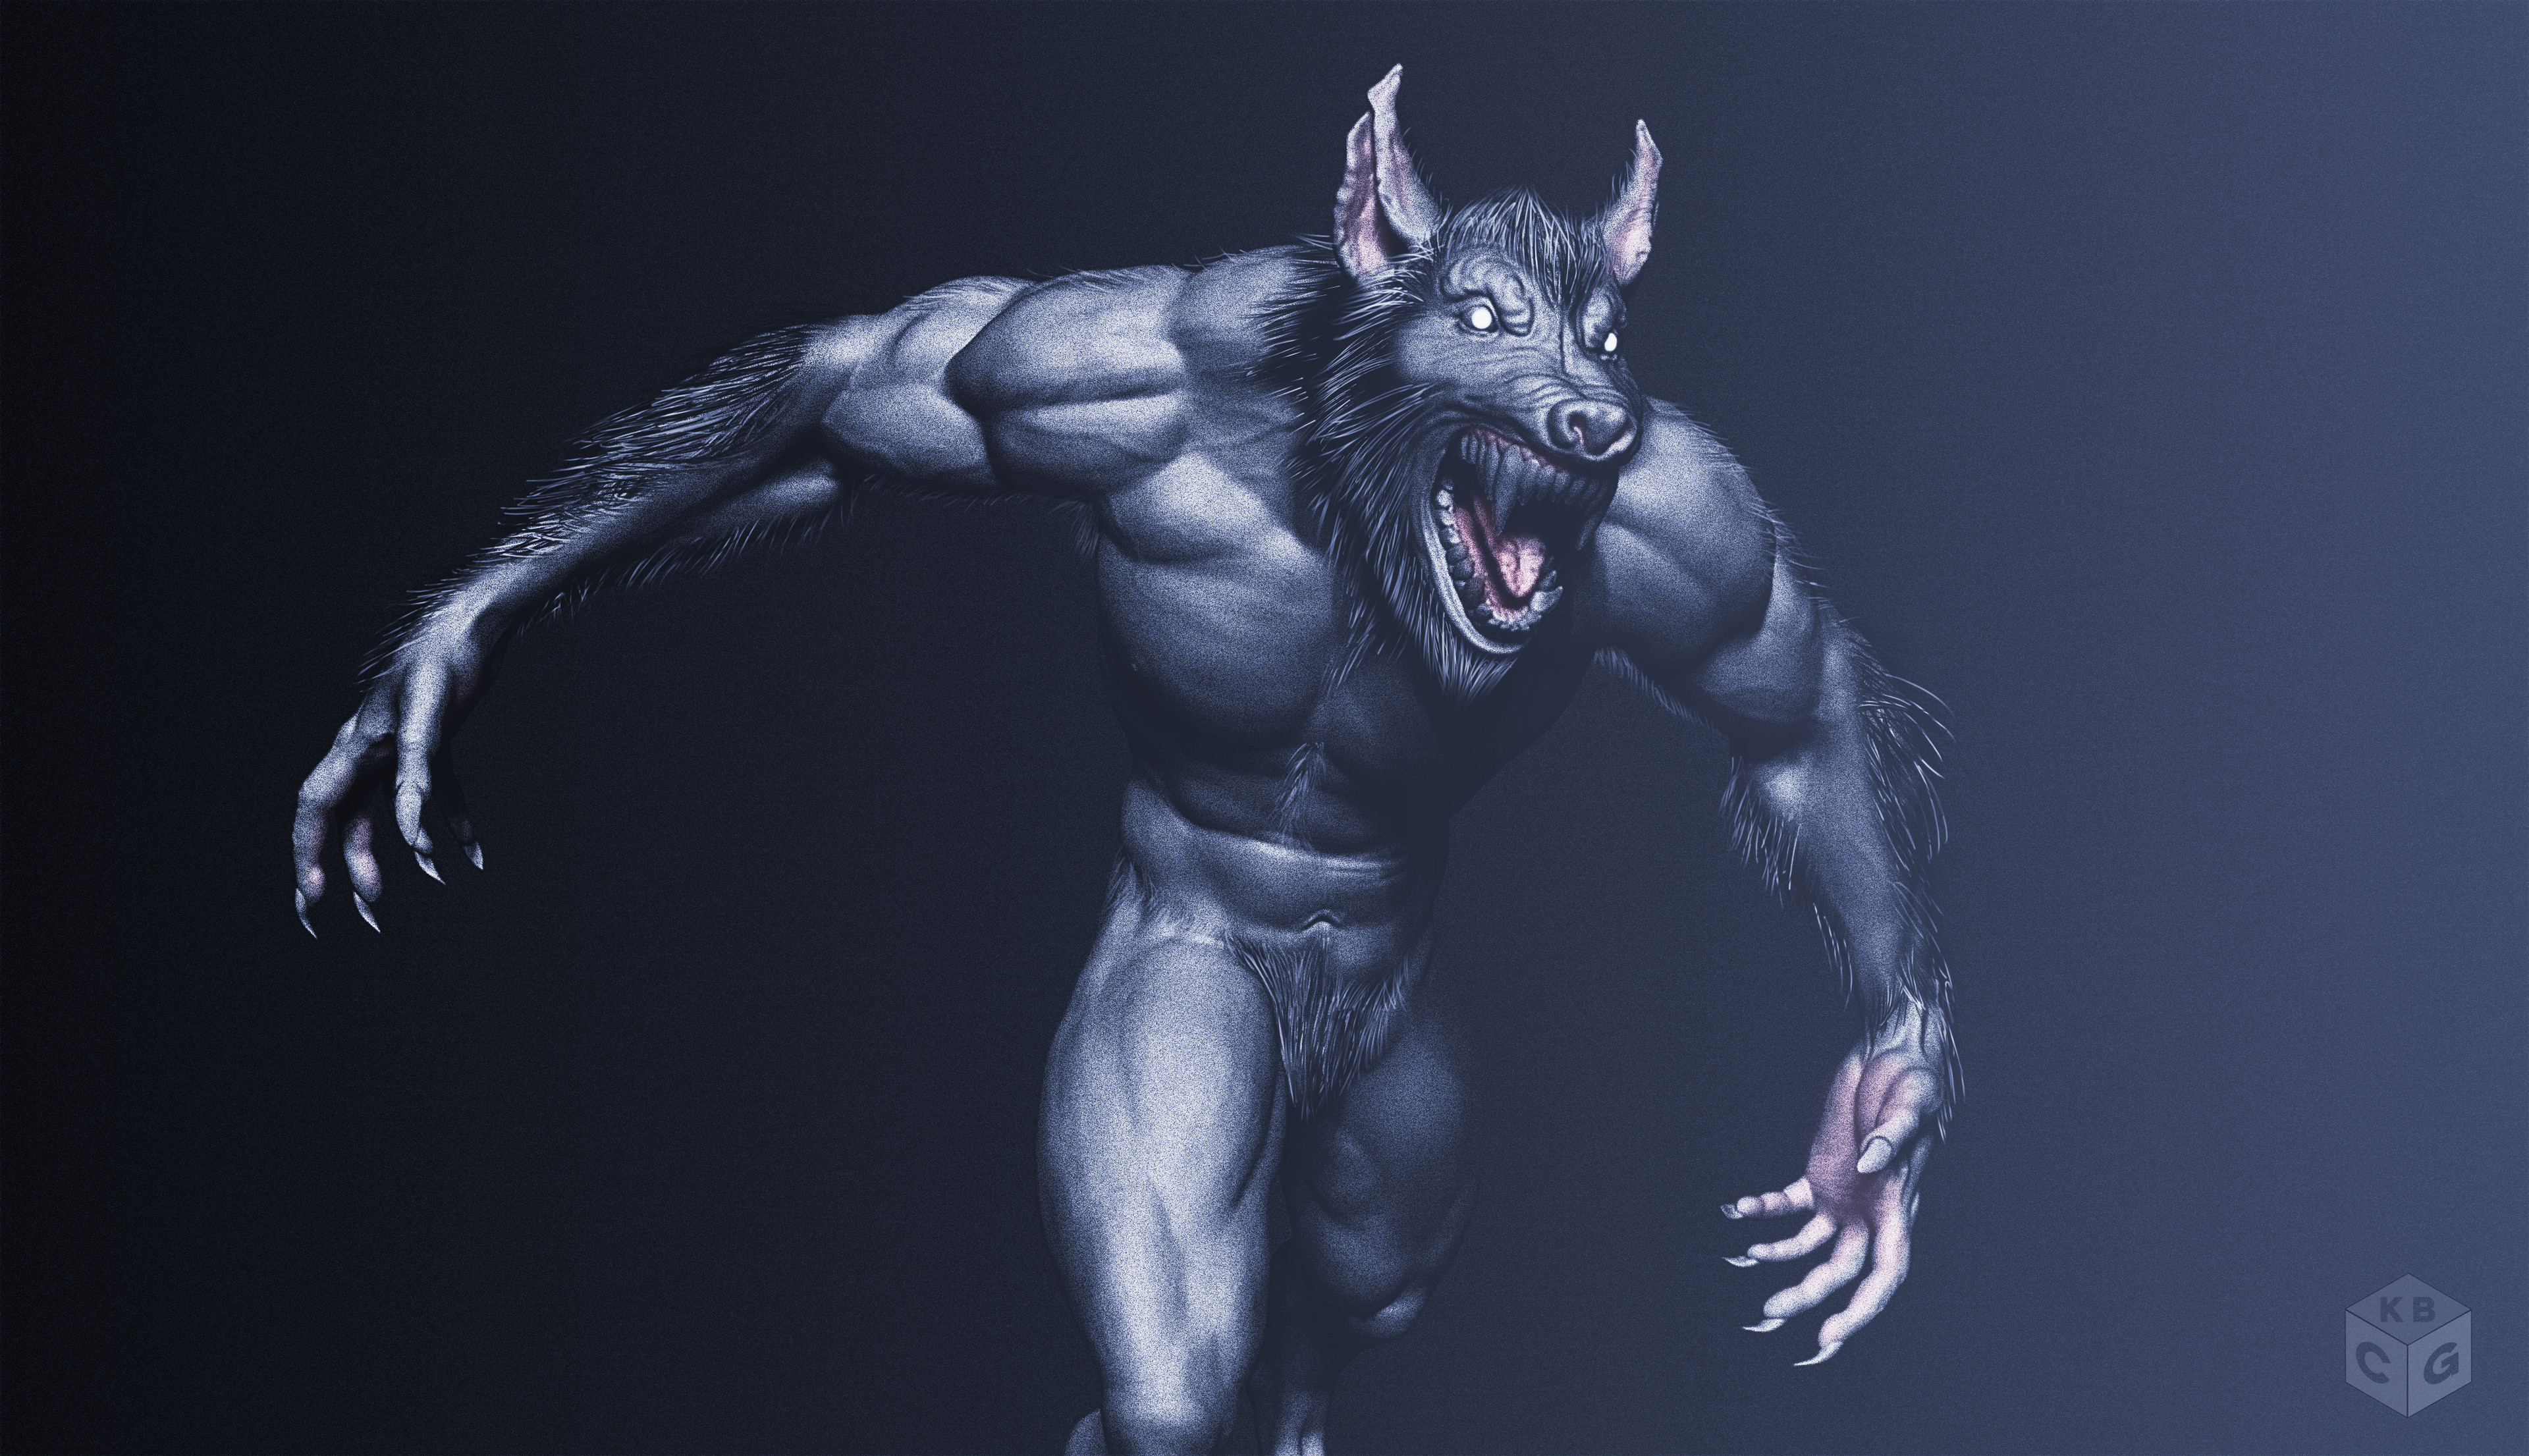 Wolf-Man Zbrush &amp; Photoshop sketch inspired by the Love Death &amp; Robots Episode Shape-Shifters.